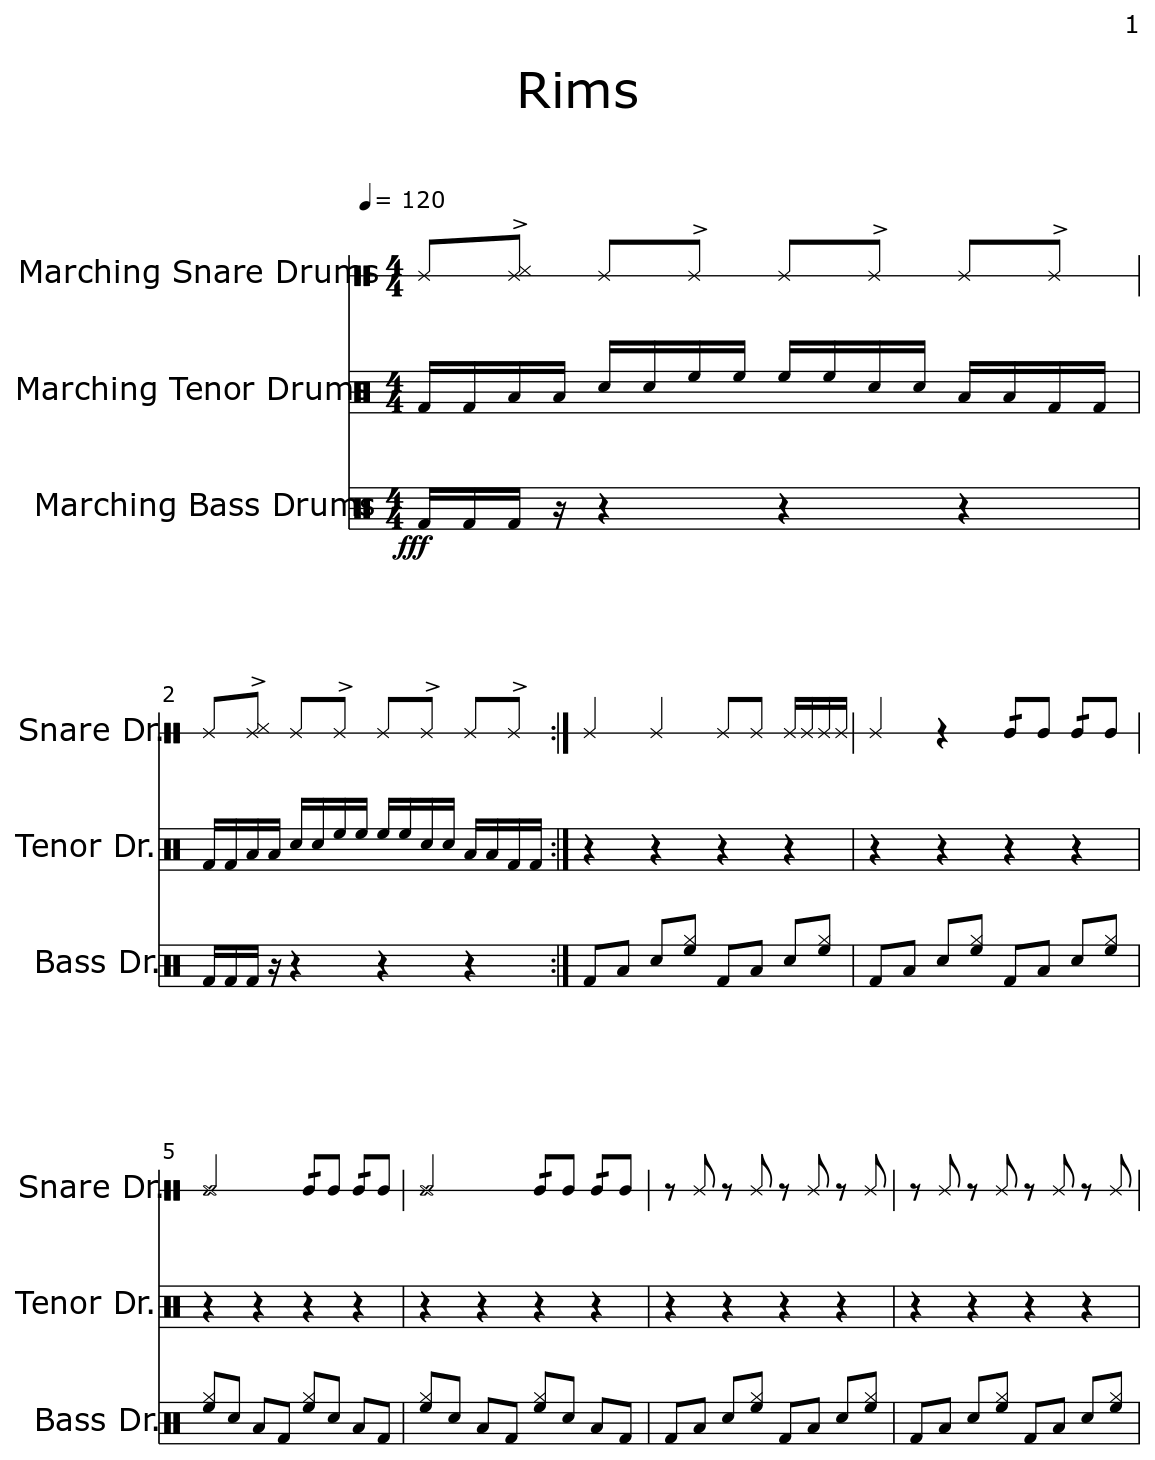 Rims - Sheet music for Marching Bass Drums